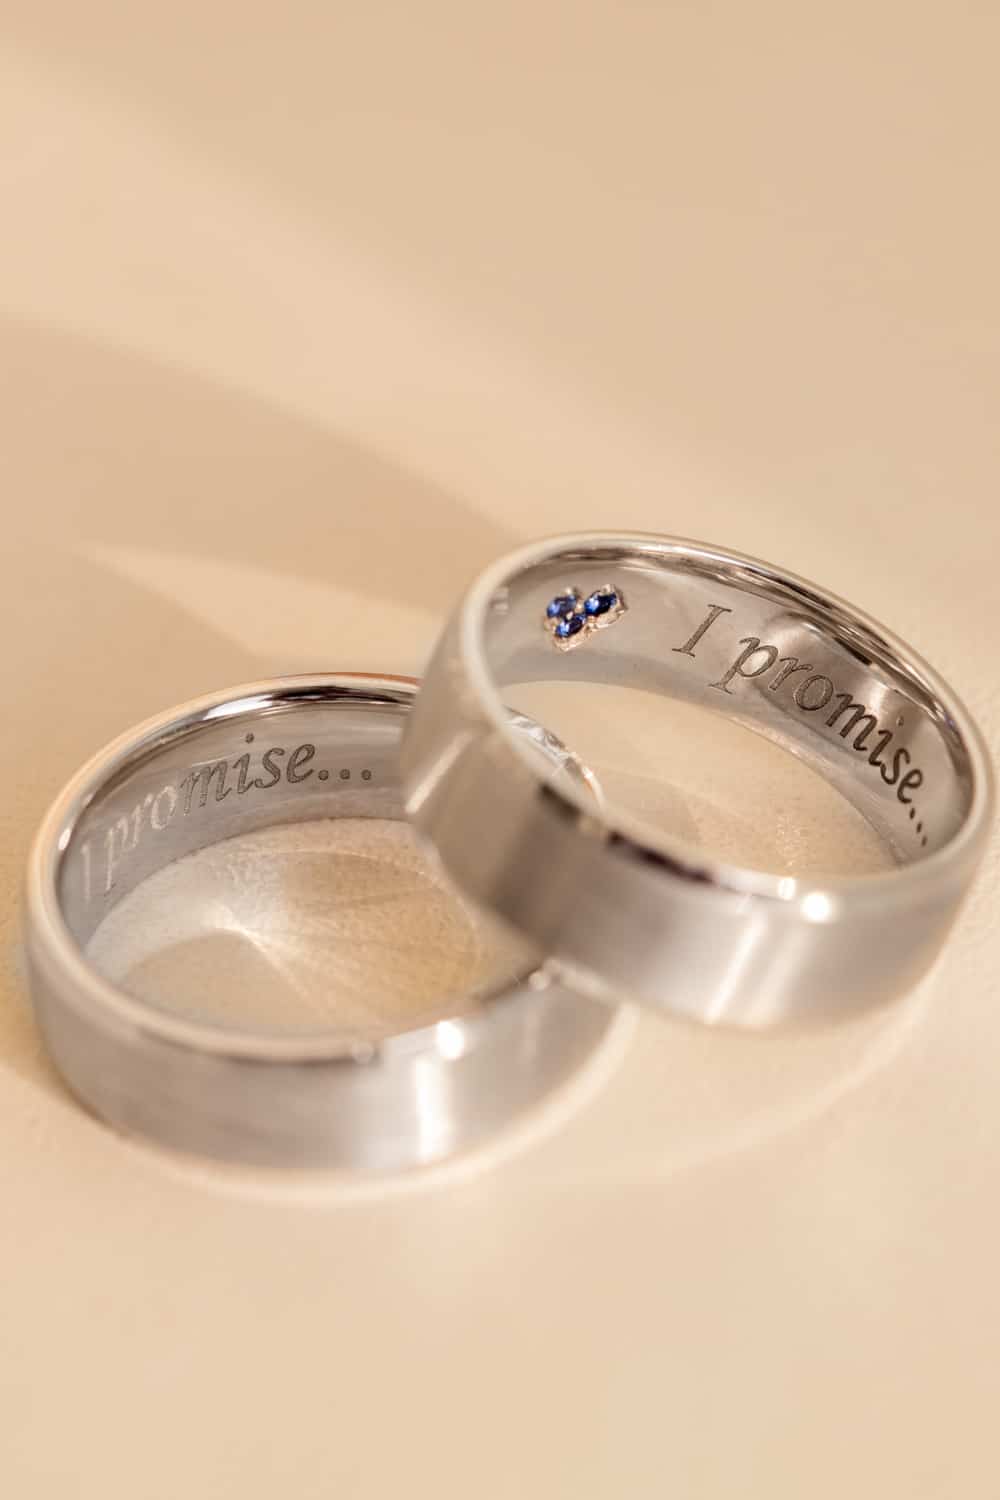 Vows Engraved